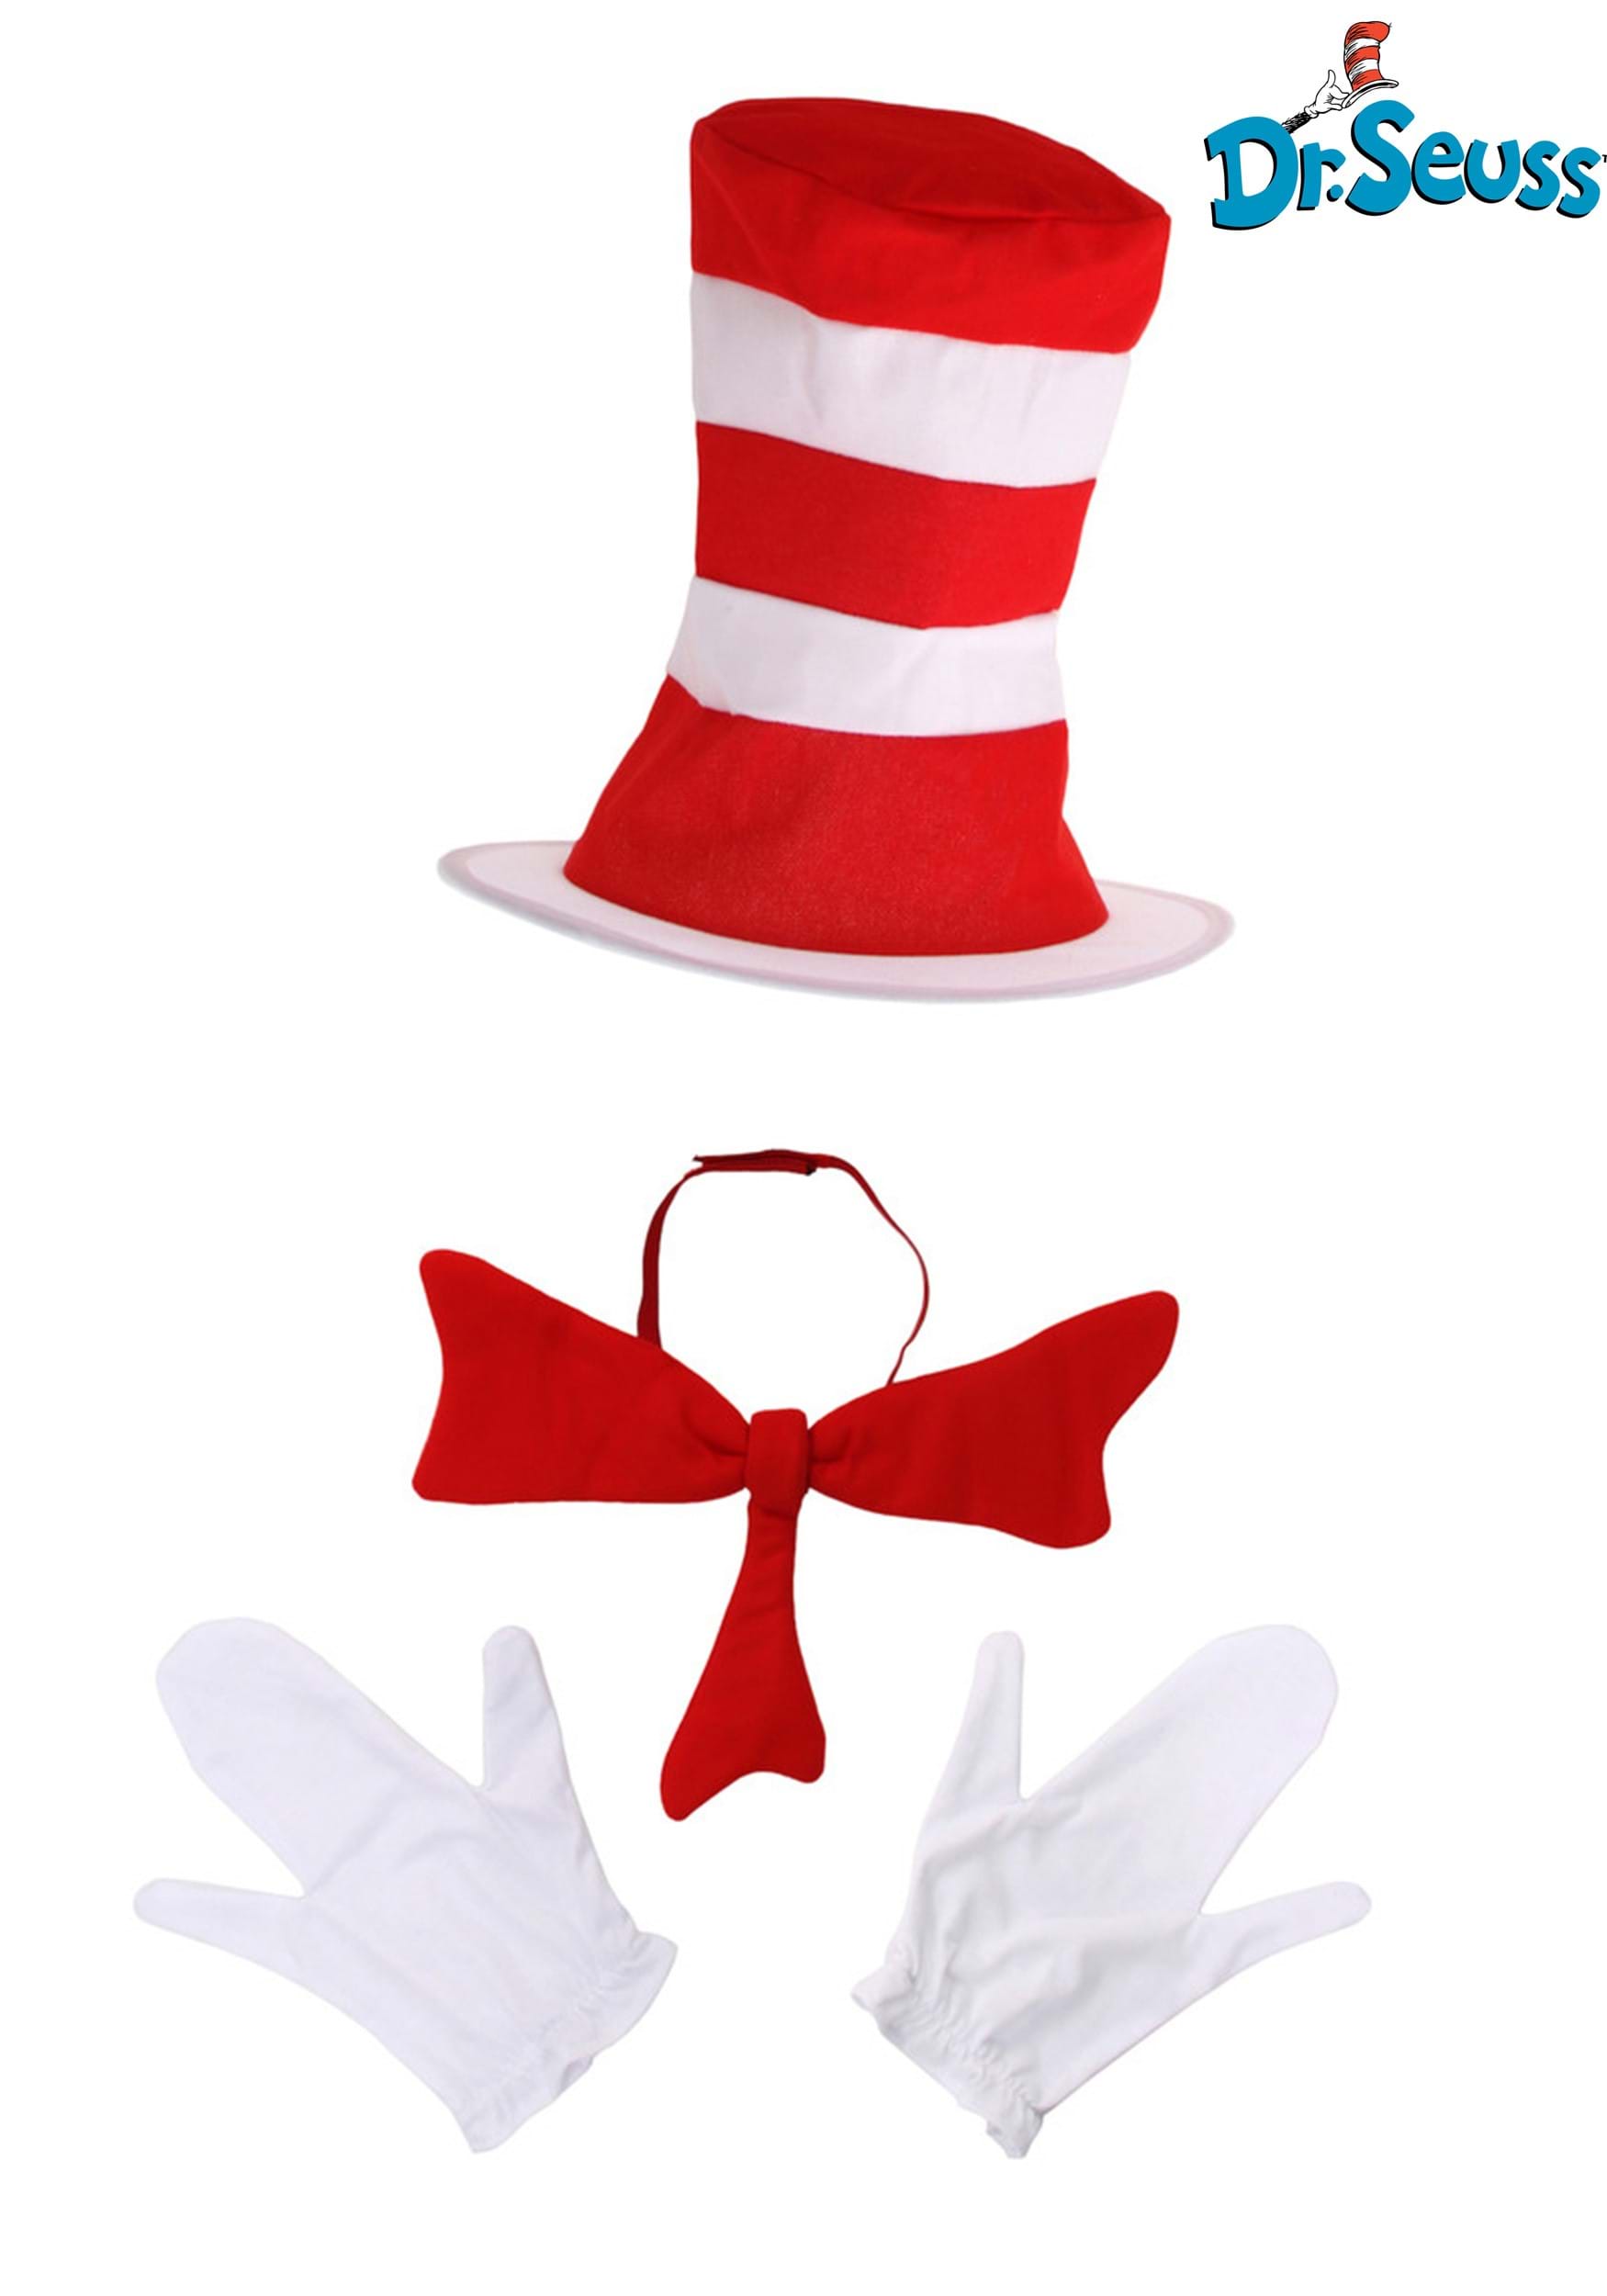 Storybook Cat In The Hat Costume Accessory Kit For Adults